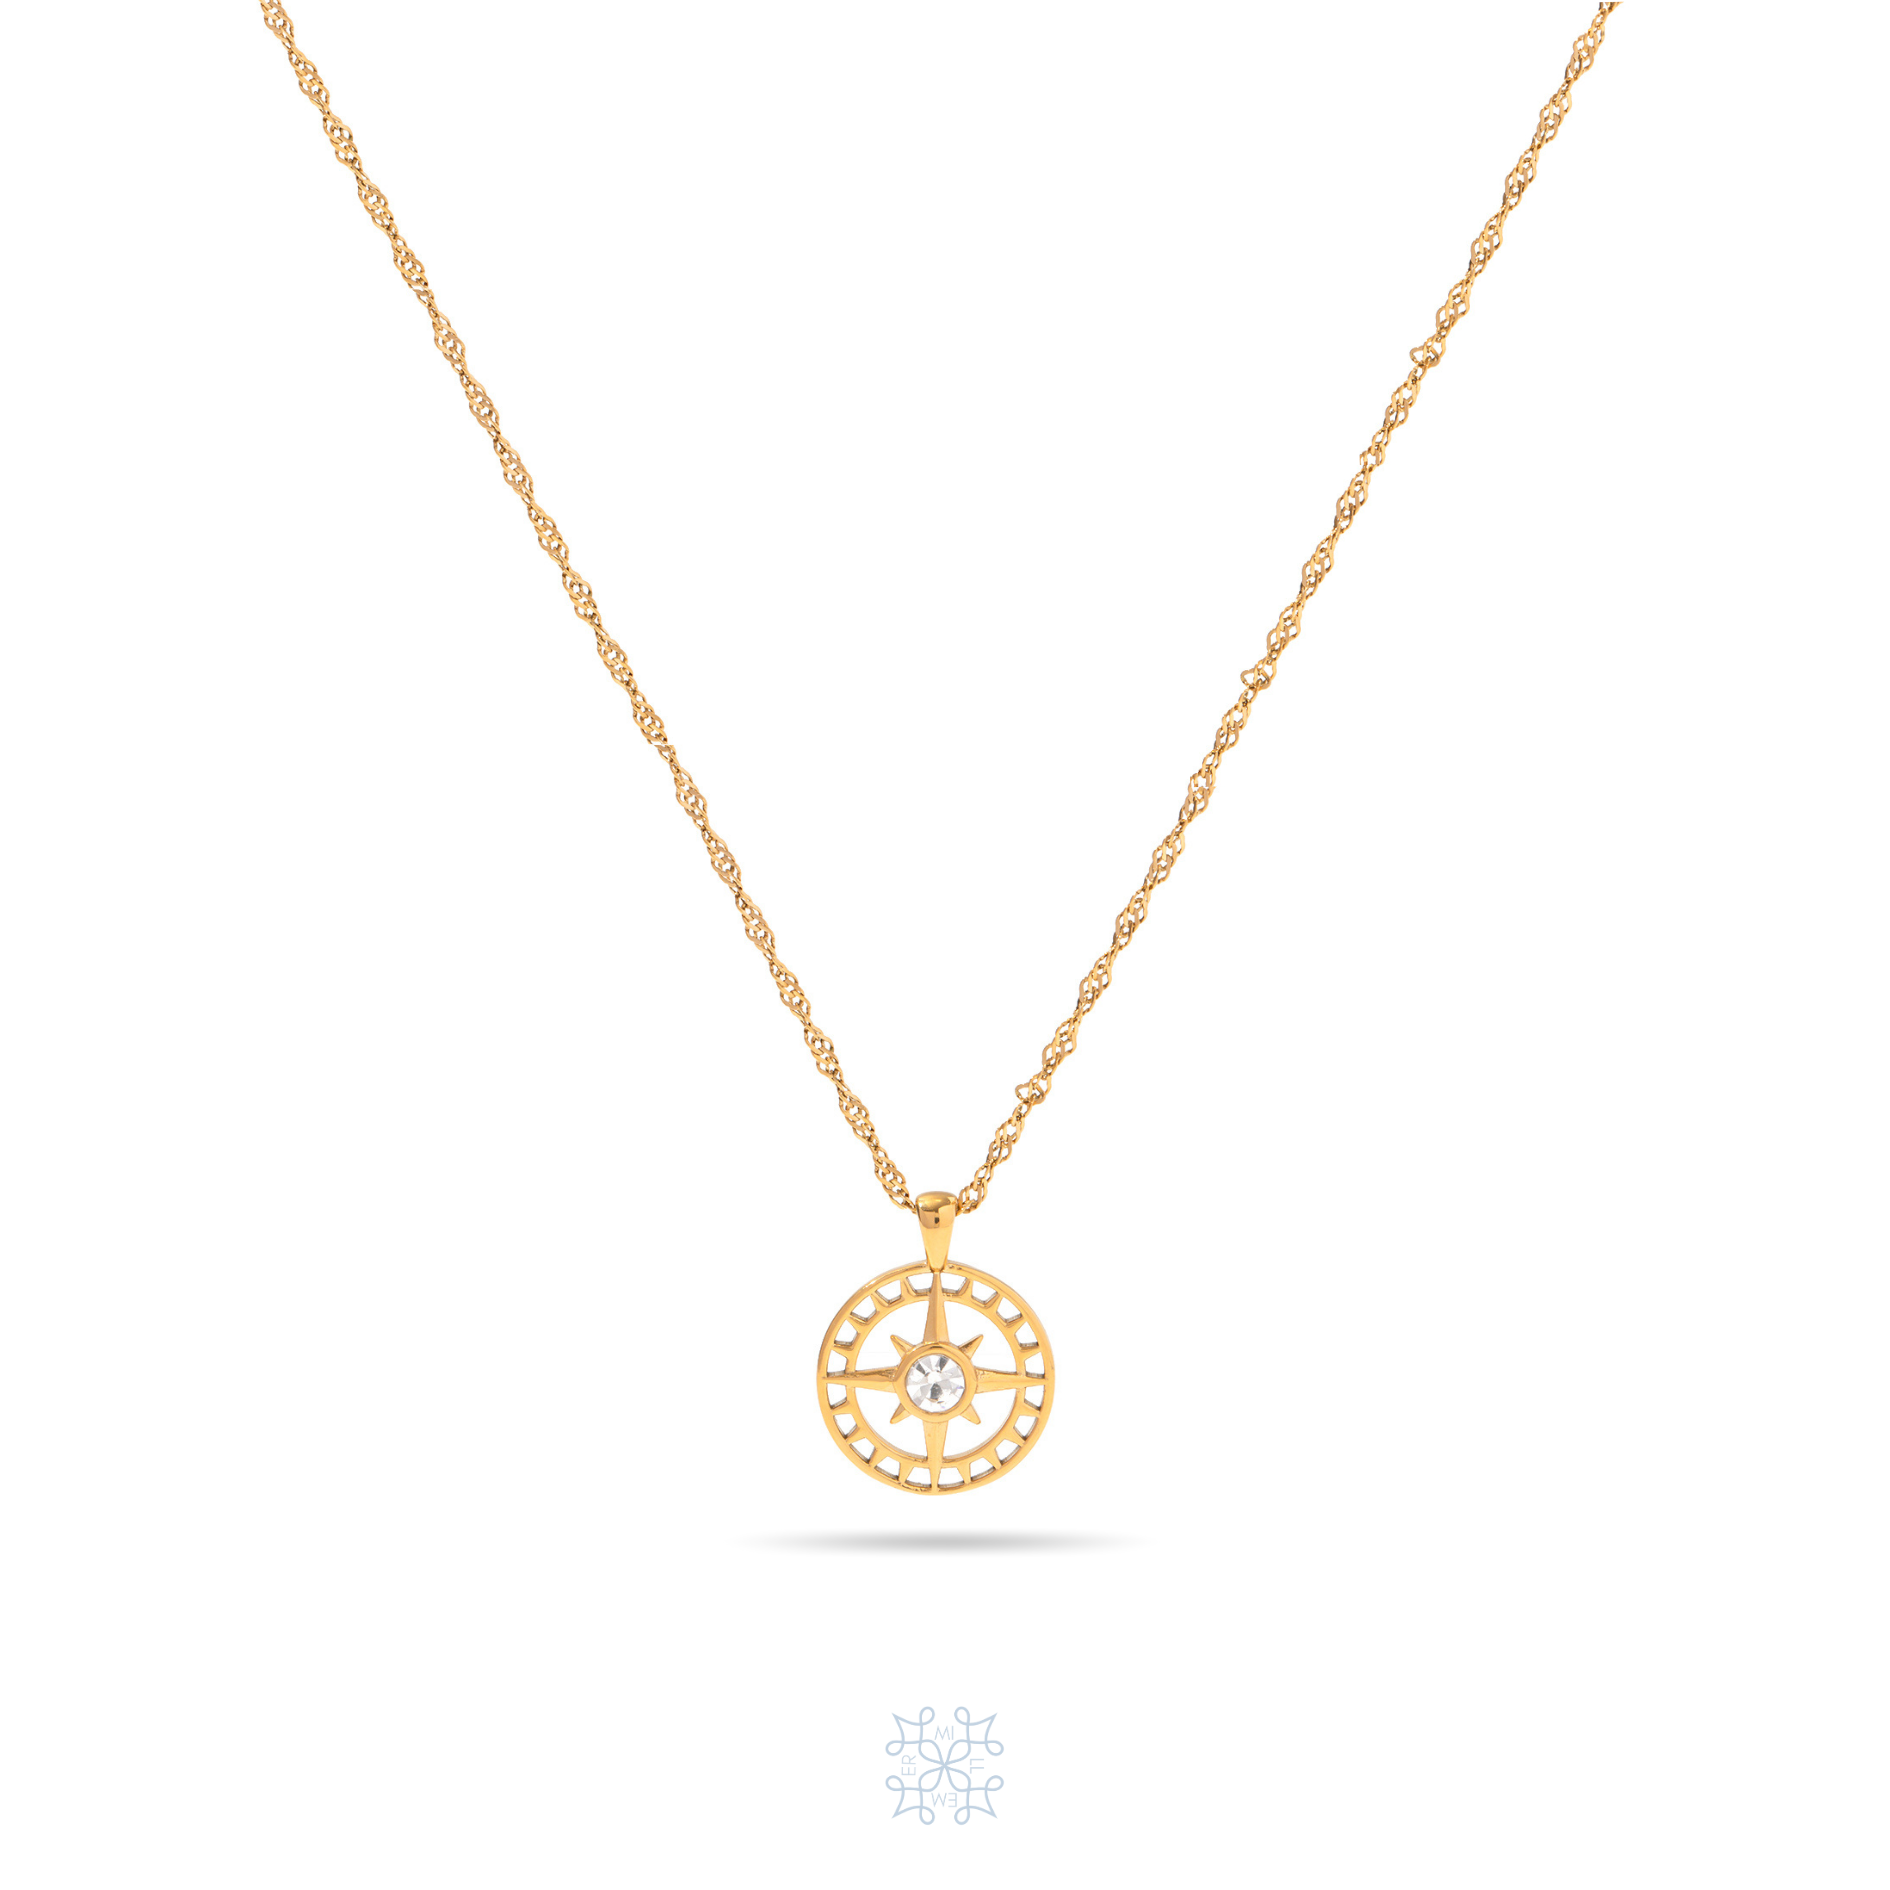 COMPASS Pendant Zircon Gold Necklace. gold chain necklace. Compass pendant with a zircon on the center of the pendant.